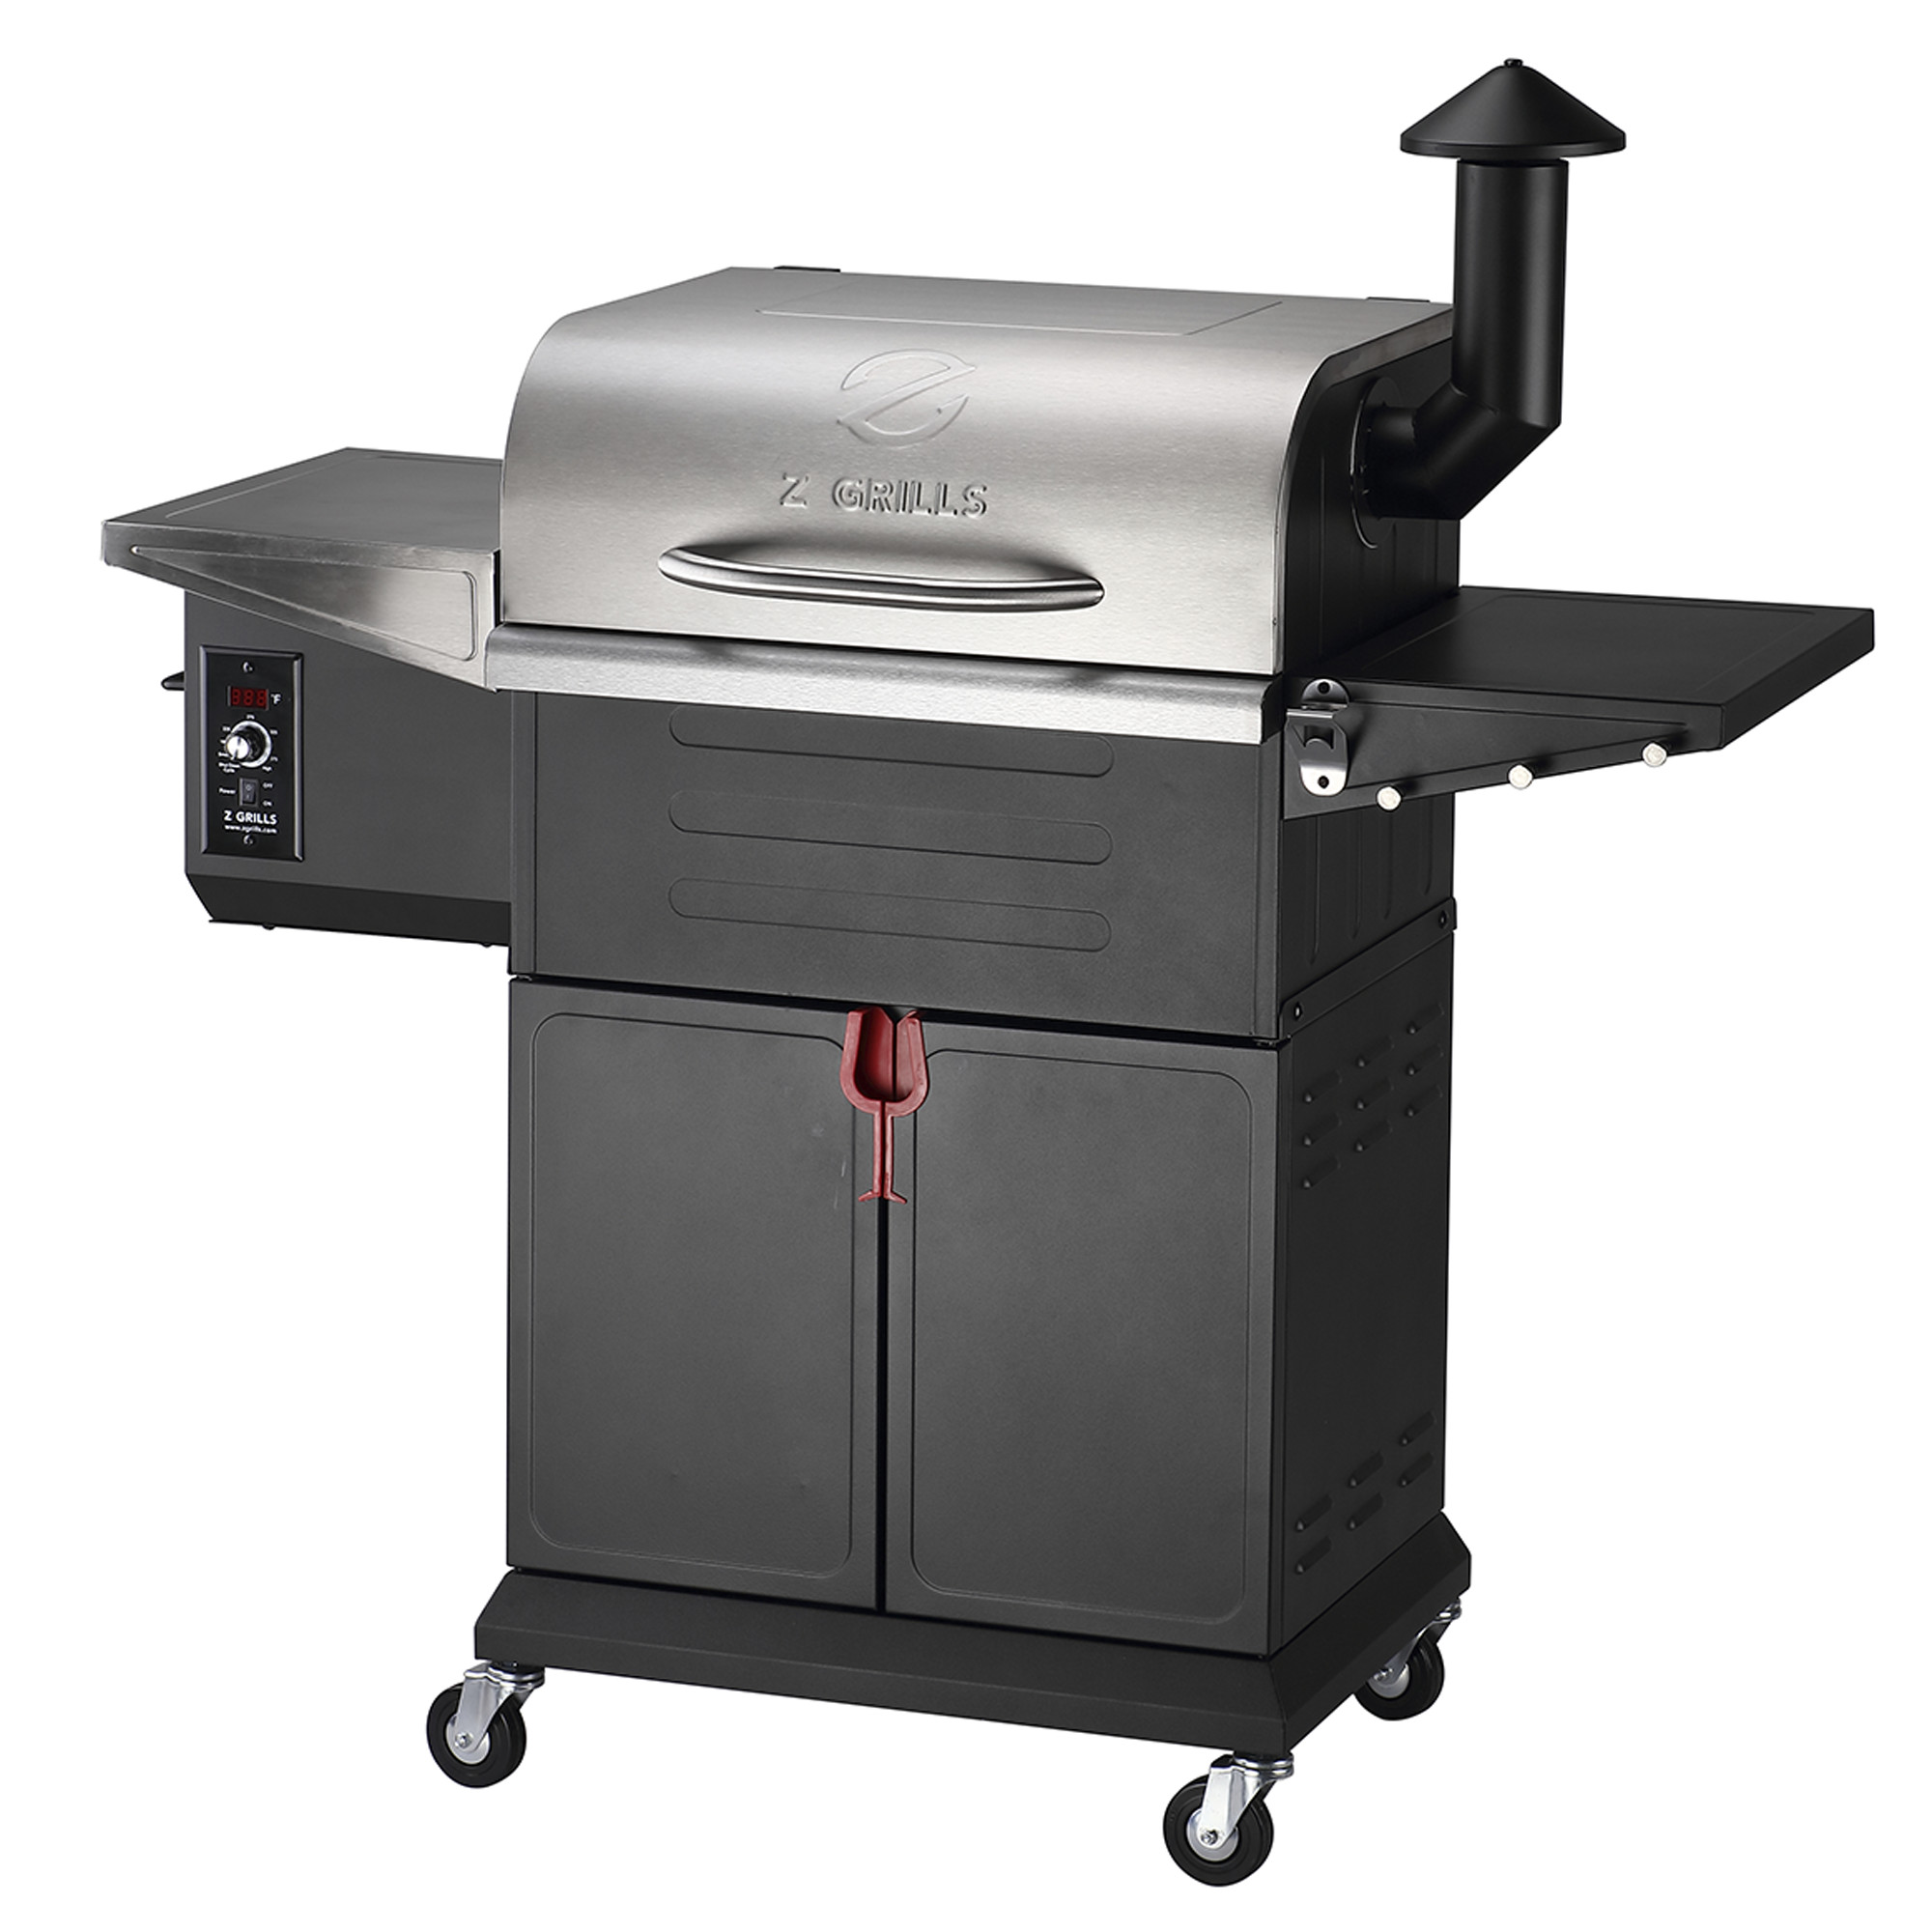 Z GRILLS Wood Pellet Grill Smoker with PID Technology, Auto Temperature Control, Direct Flame Searing Function, 572 sq in Cooking Area for Outdoor BBQ - image 1 of 4